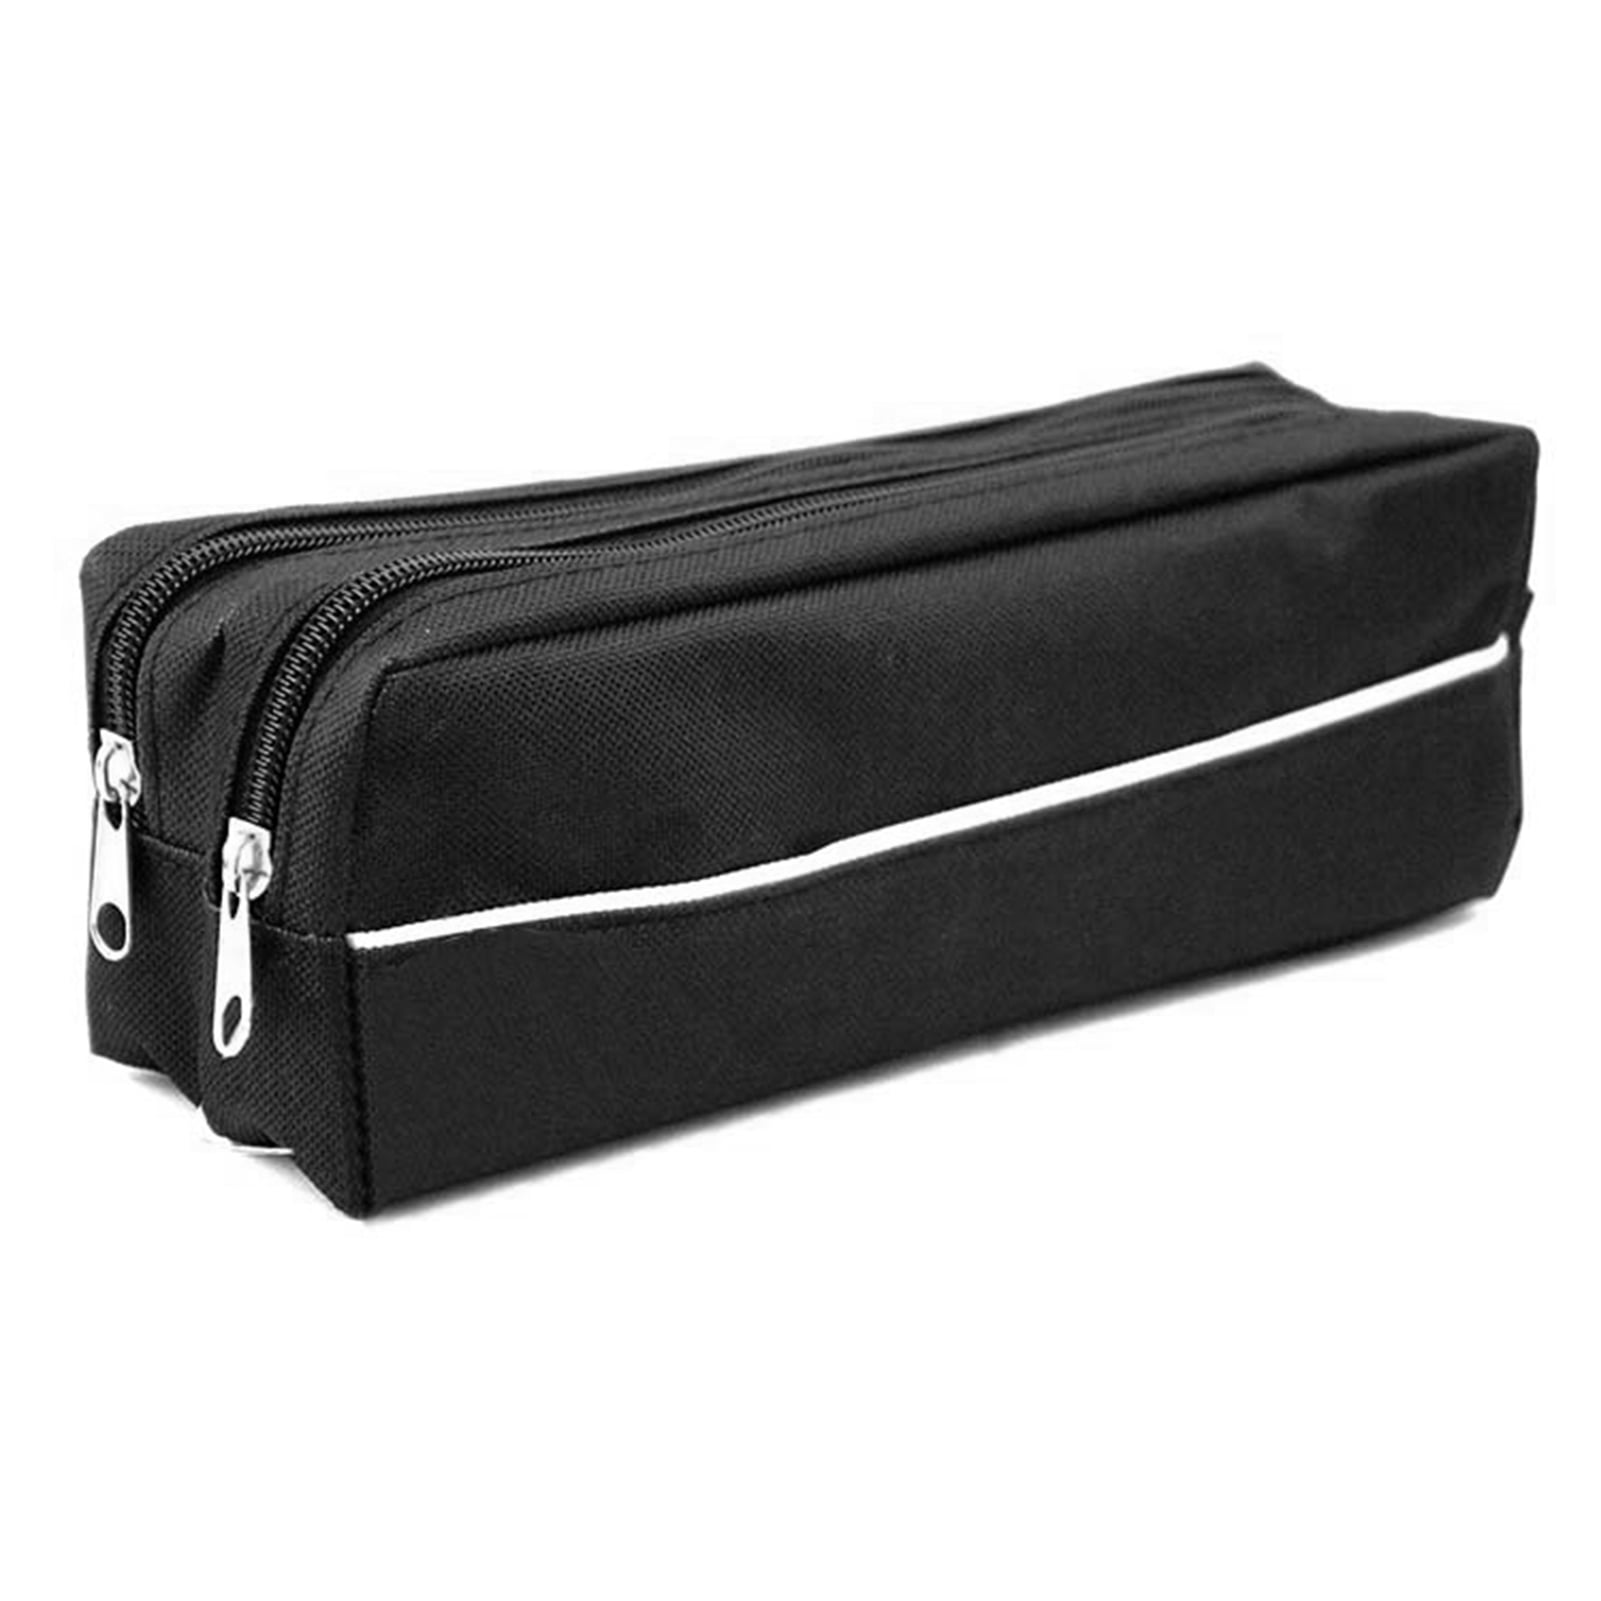 Large Capacity Double Zip Fabric Pencil Case Back To School College MakeUp  BaFC